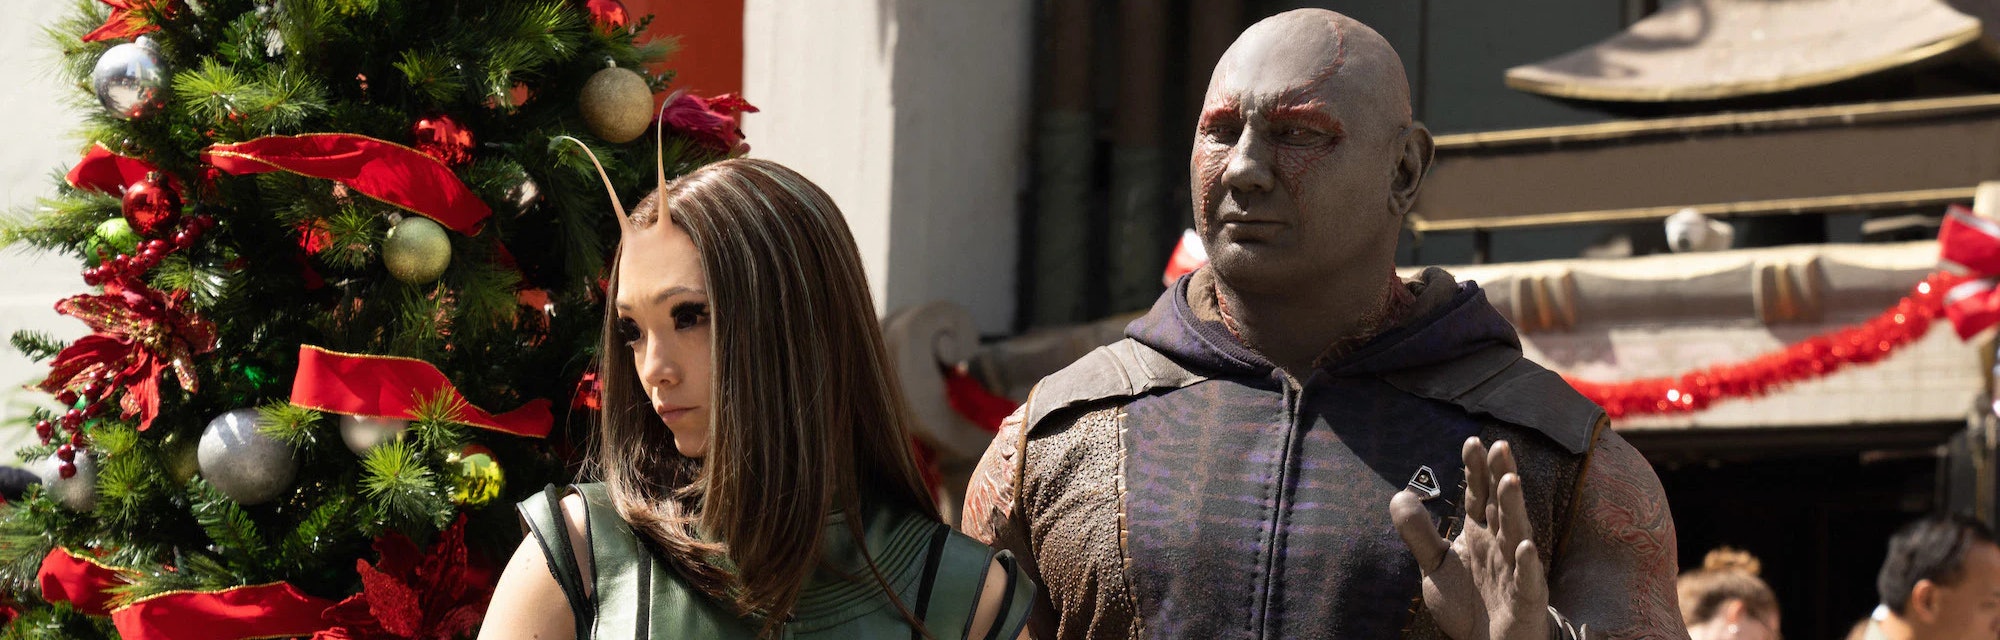 Pom Klementieff as Mantis and Dave Bautista as Drax the Destroyer in Marvel's Guardians of the Galax...